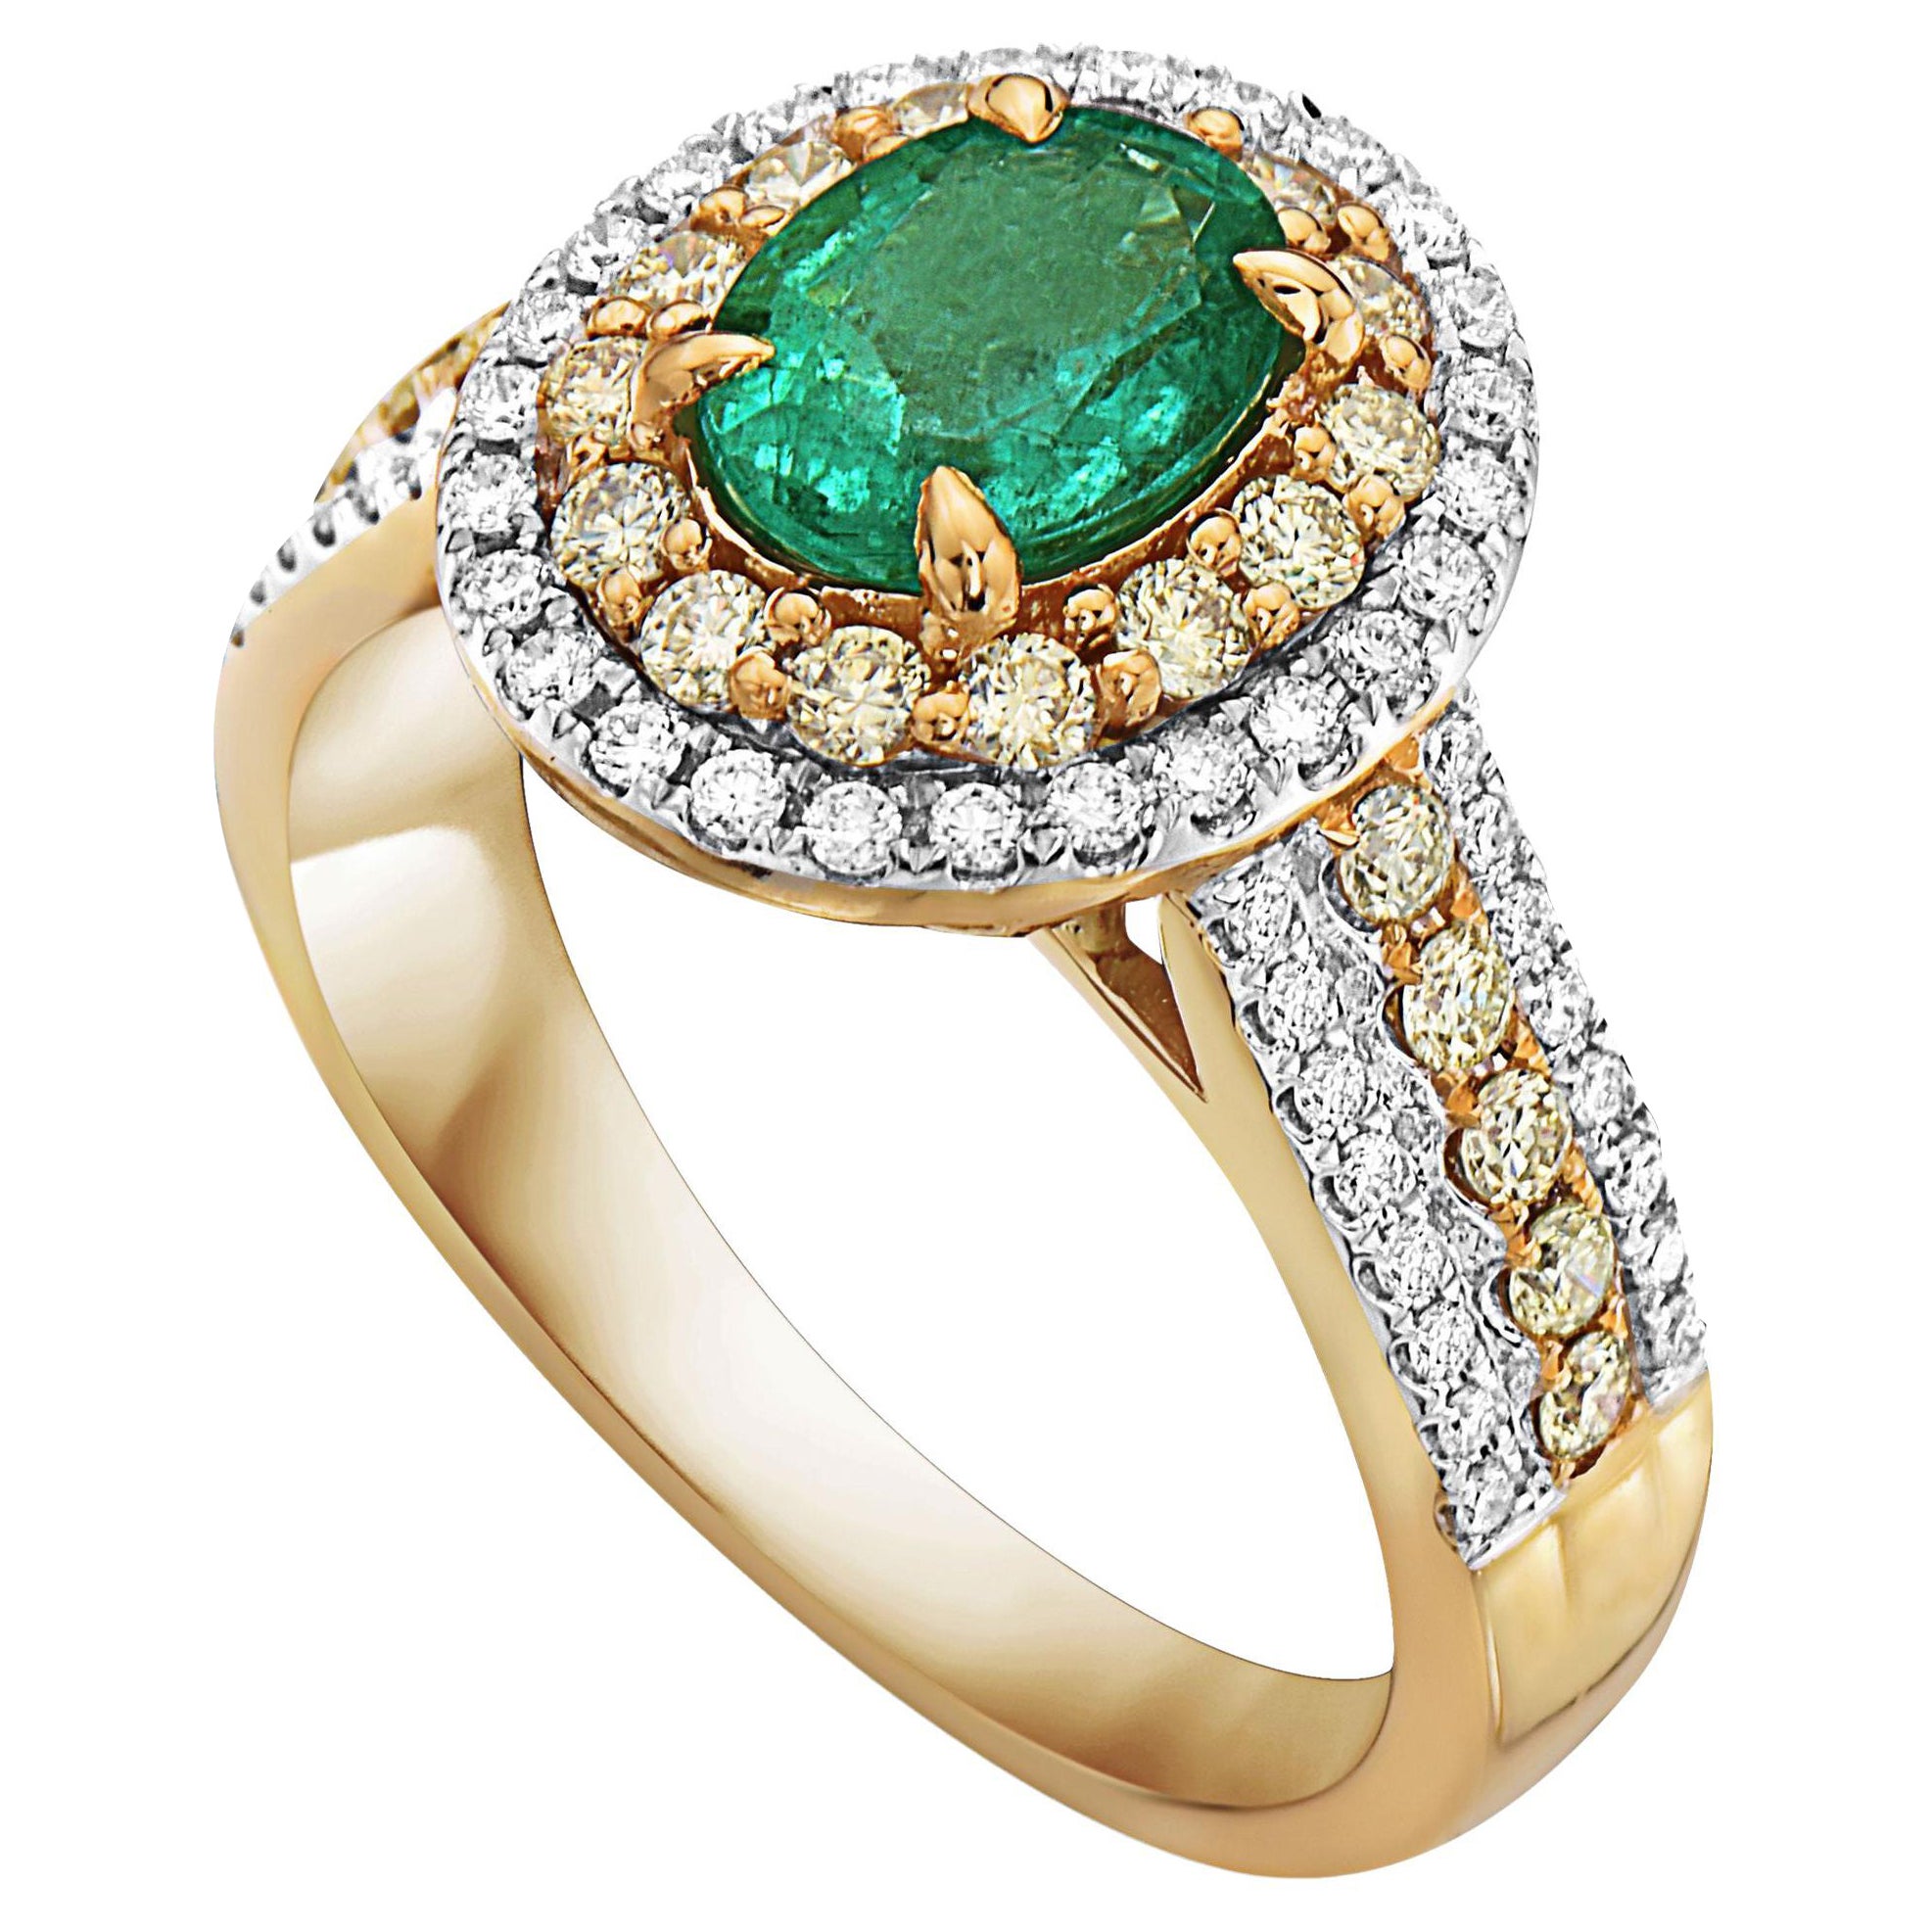 0.95 Carat Oval Emerald & Diamond Ring in 14KT Yellow Gold For Sale